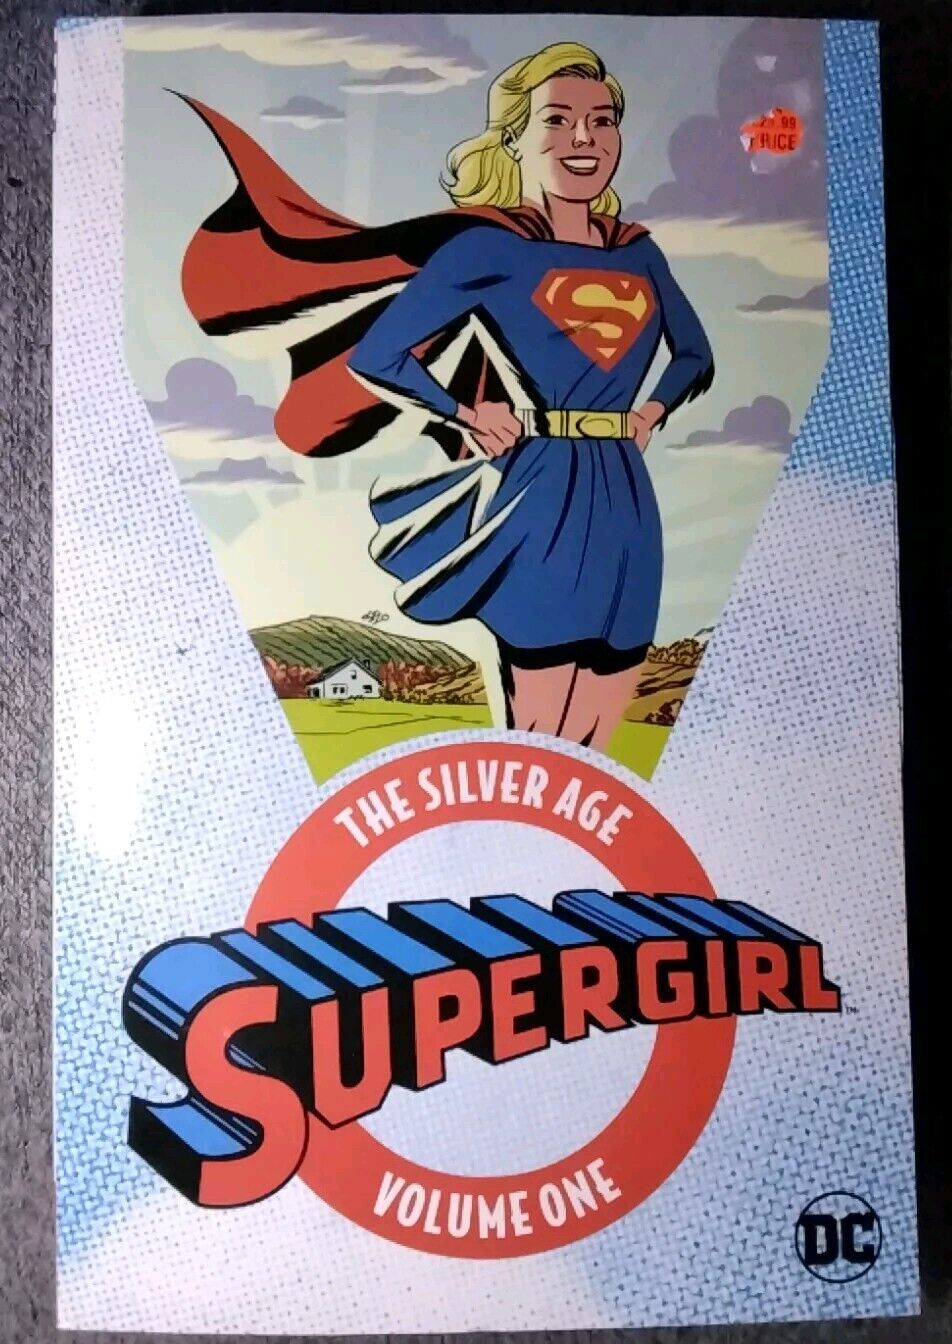 Supergirl: The Silver Age Vol. 1 by Various